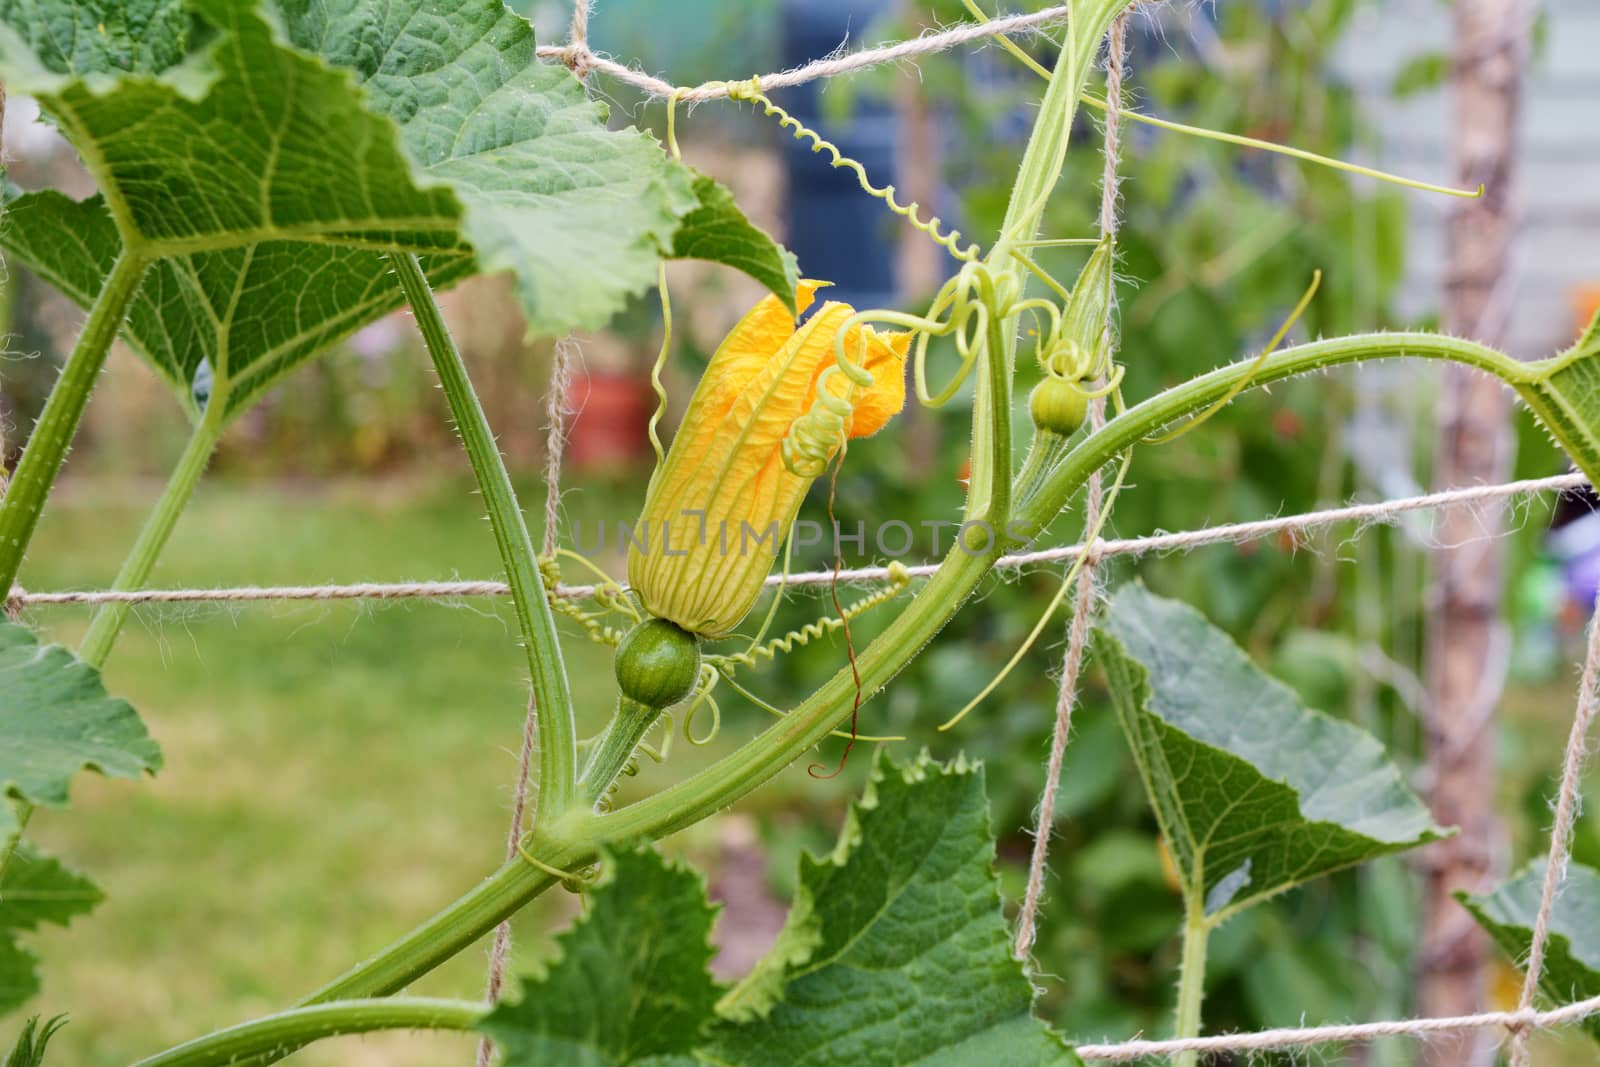 Female ornamental gourd flowers grow on the vine, climbing twine netting for support in a vegetable garden